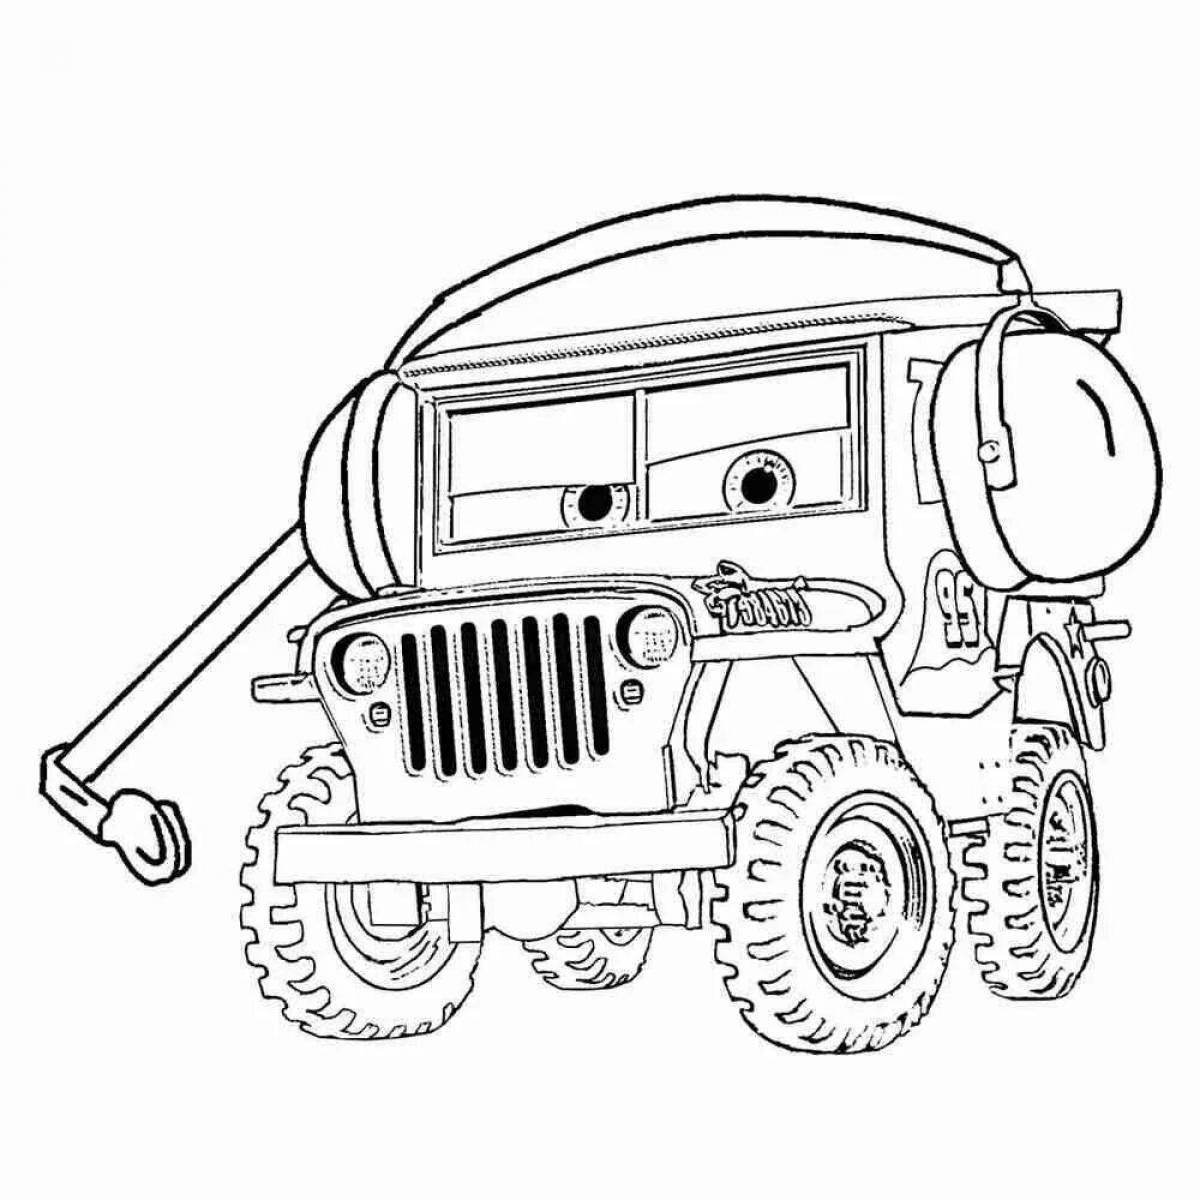 Willie's colorful car coloring page